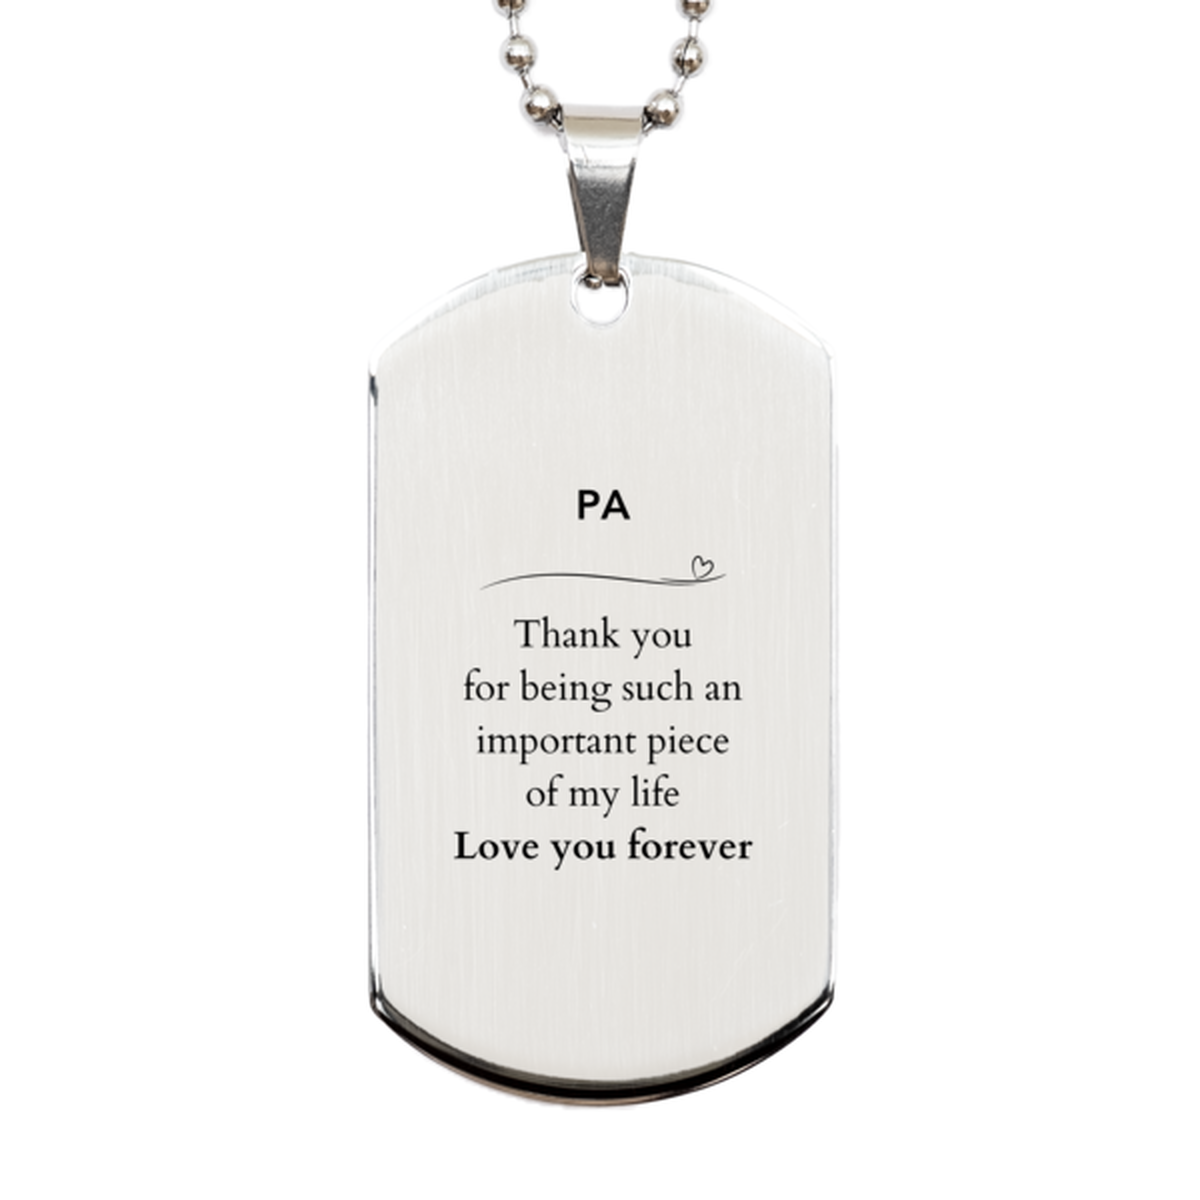 Appropriate Pa Silver Dog Tag Epic Birthday Gifts for Pa Thank you for being such an important piece of my life Pa Christmas Mothers Fathers Day